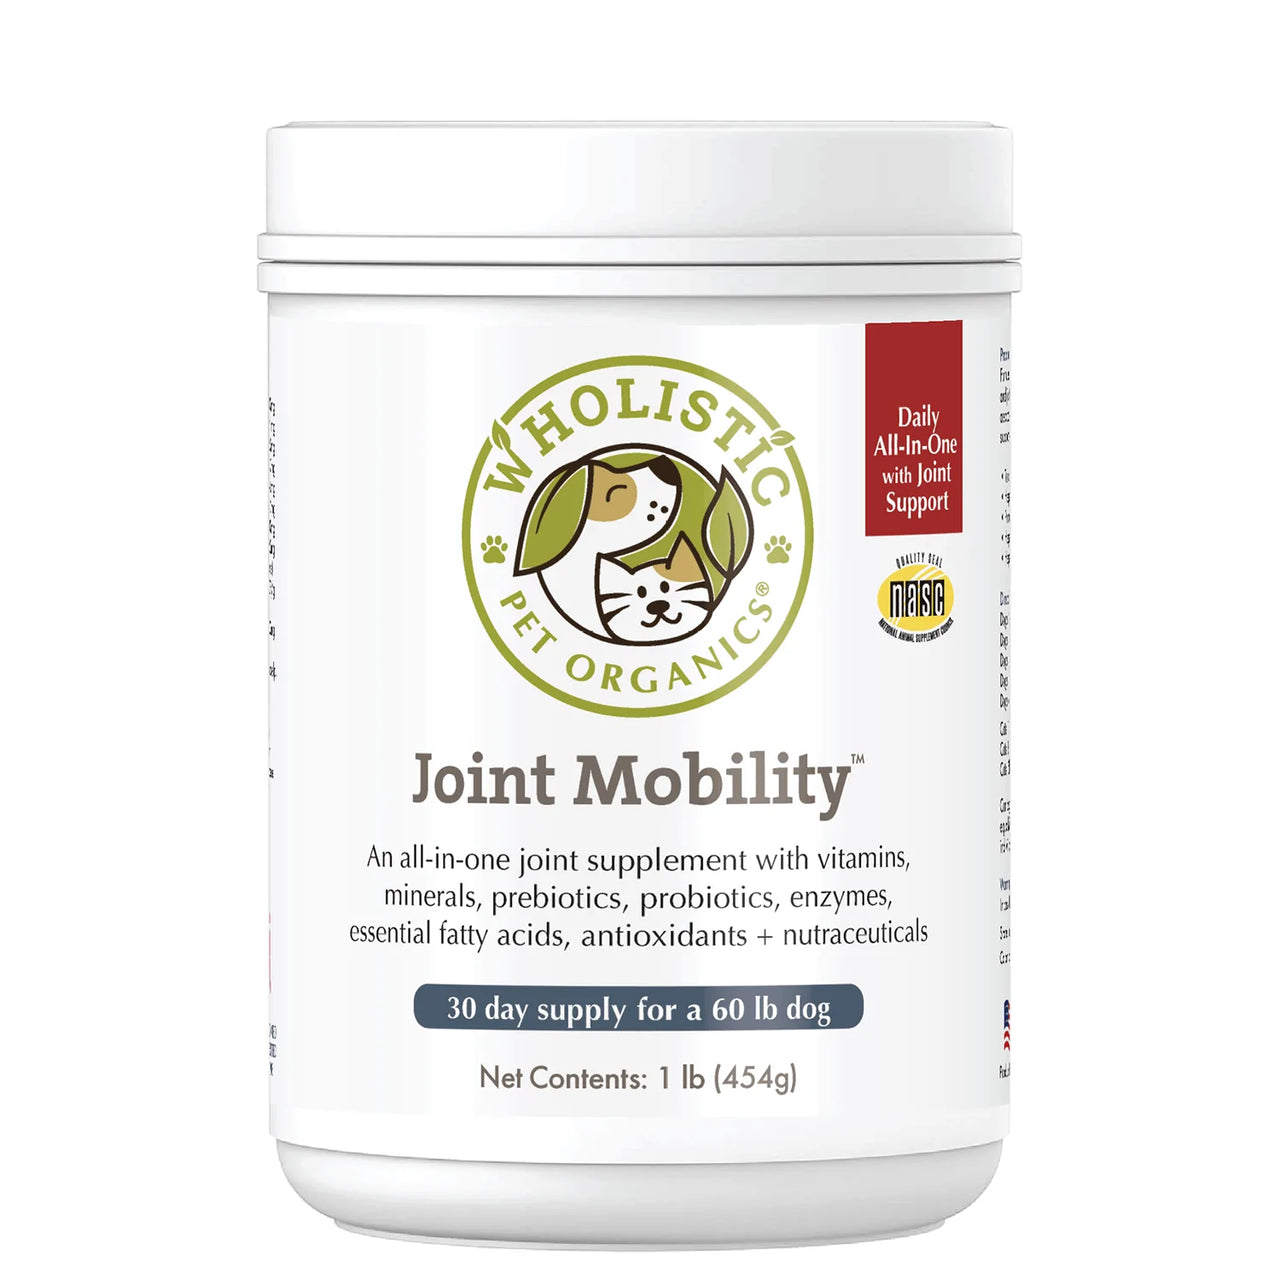 Canine Joint Mobility